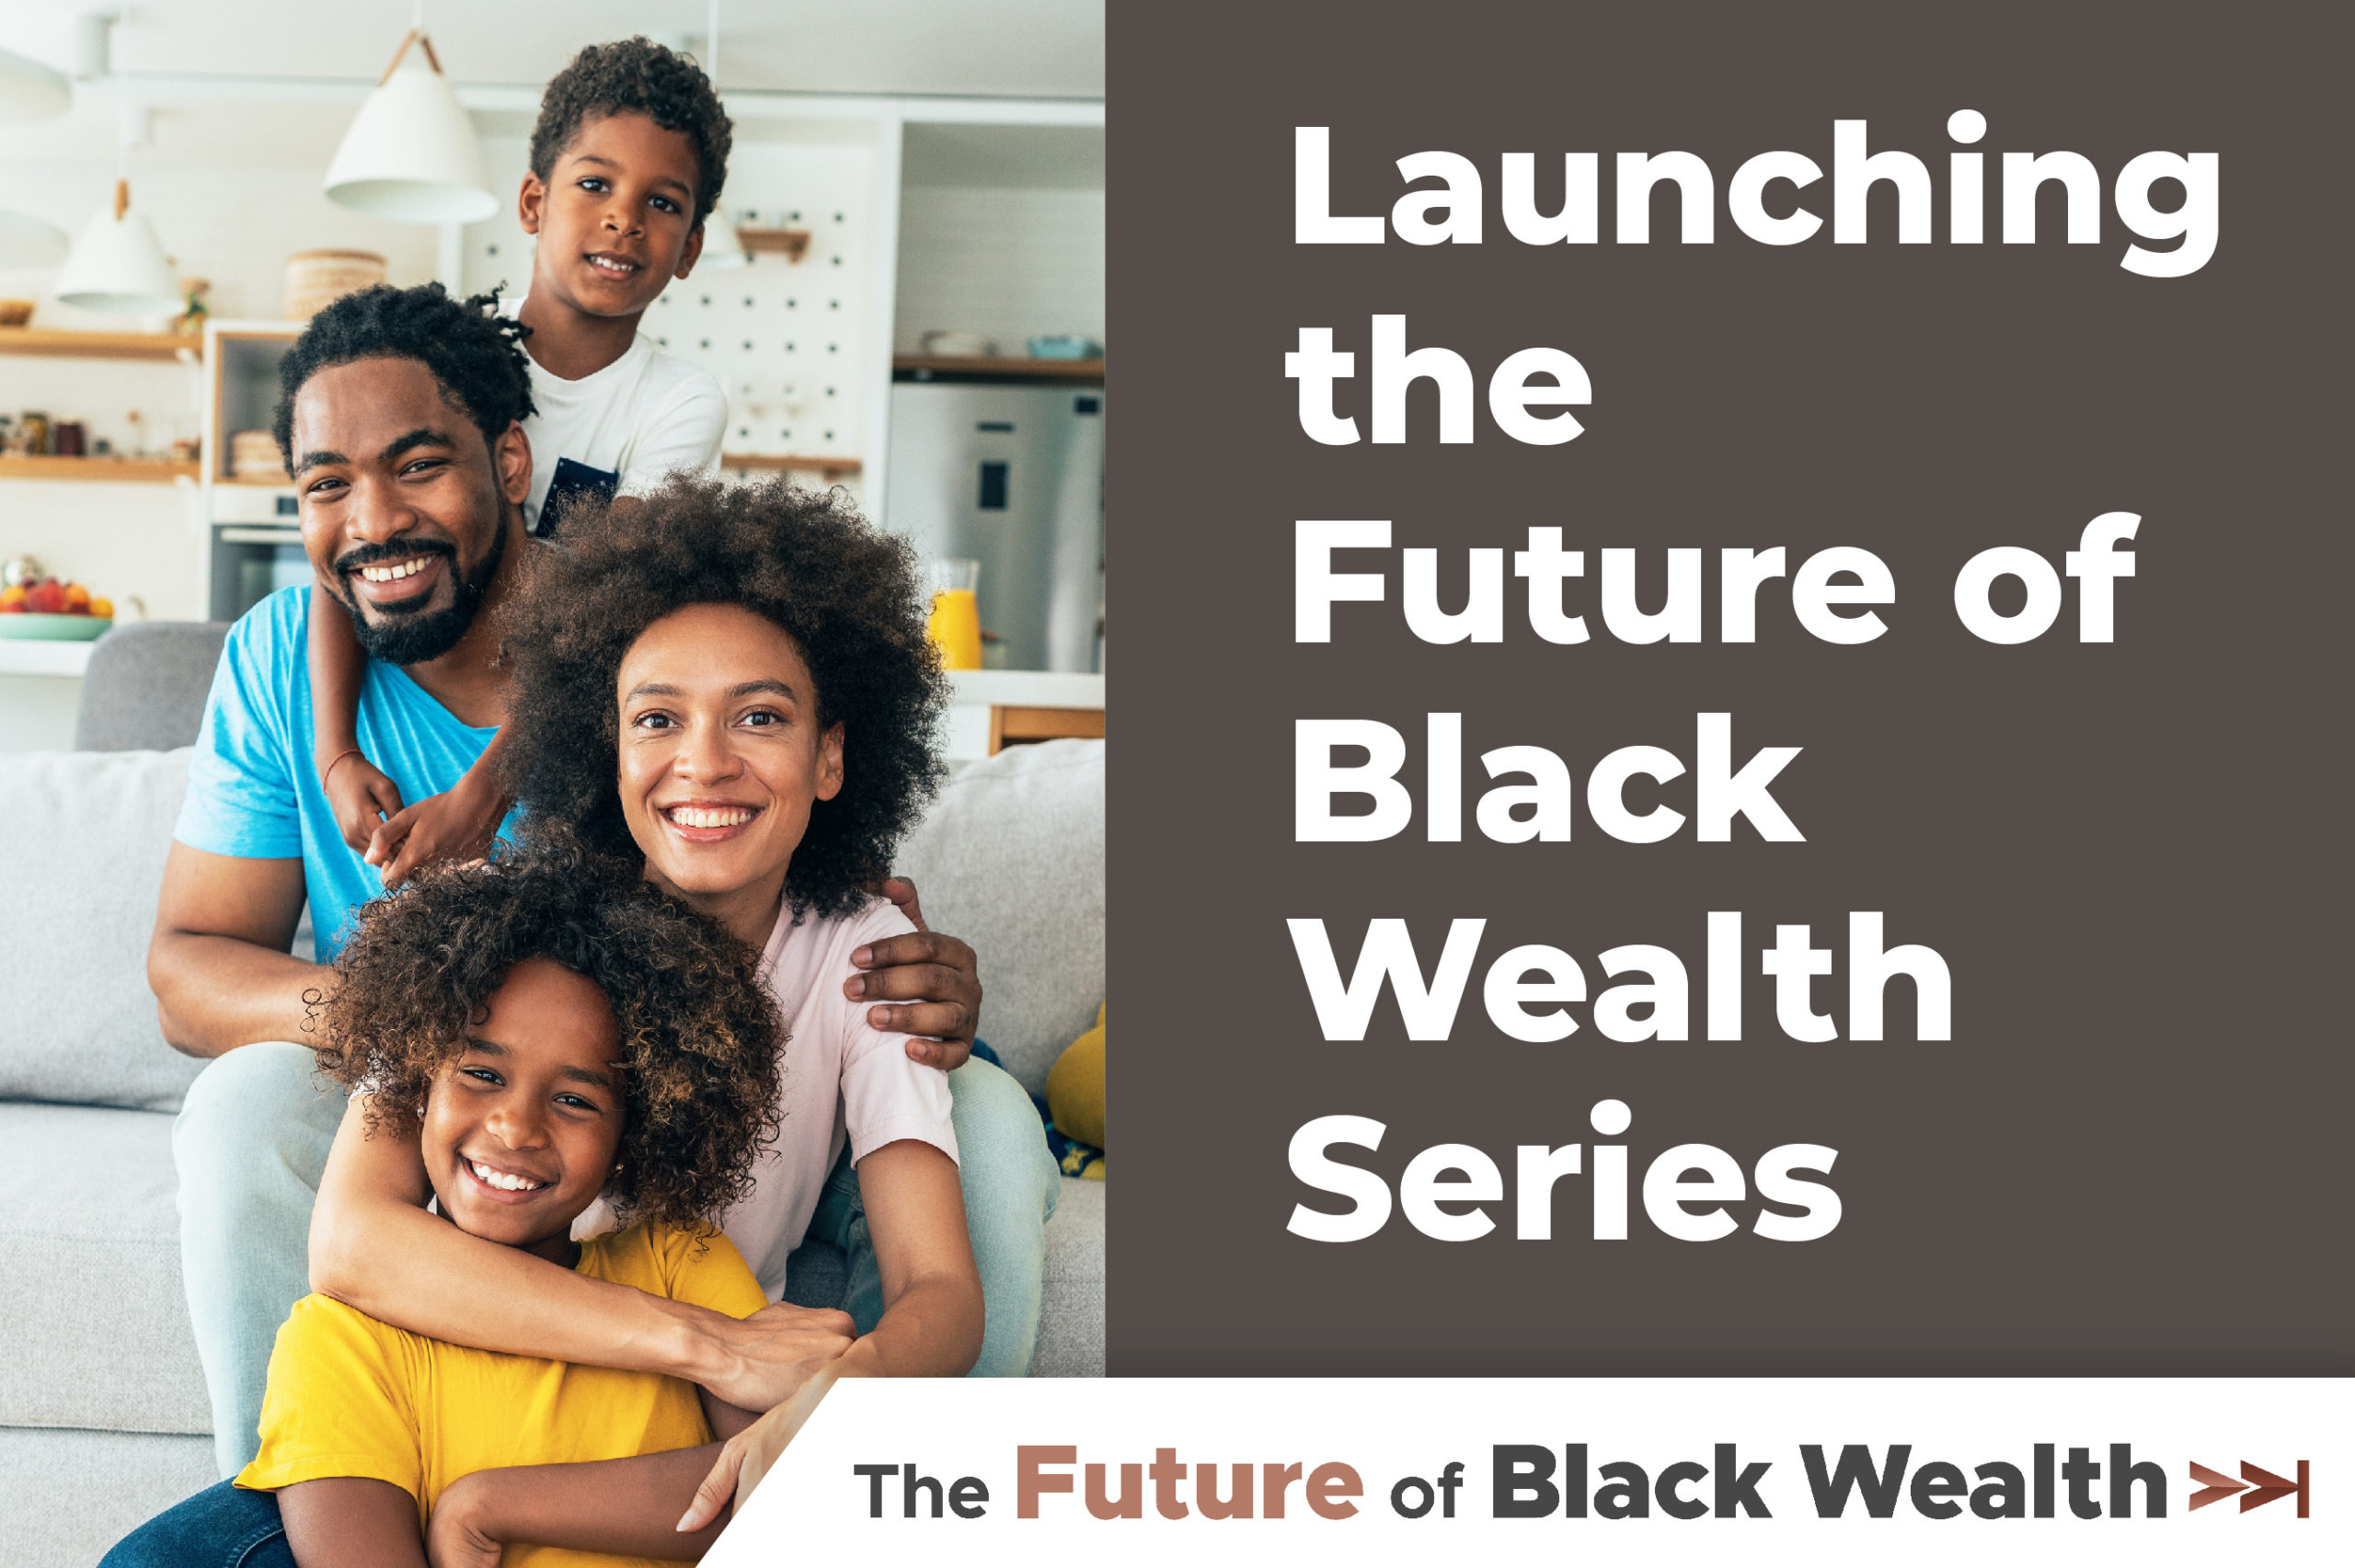 Launching the Future of Black Wealth Series